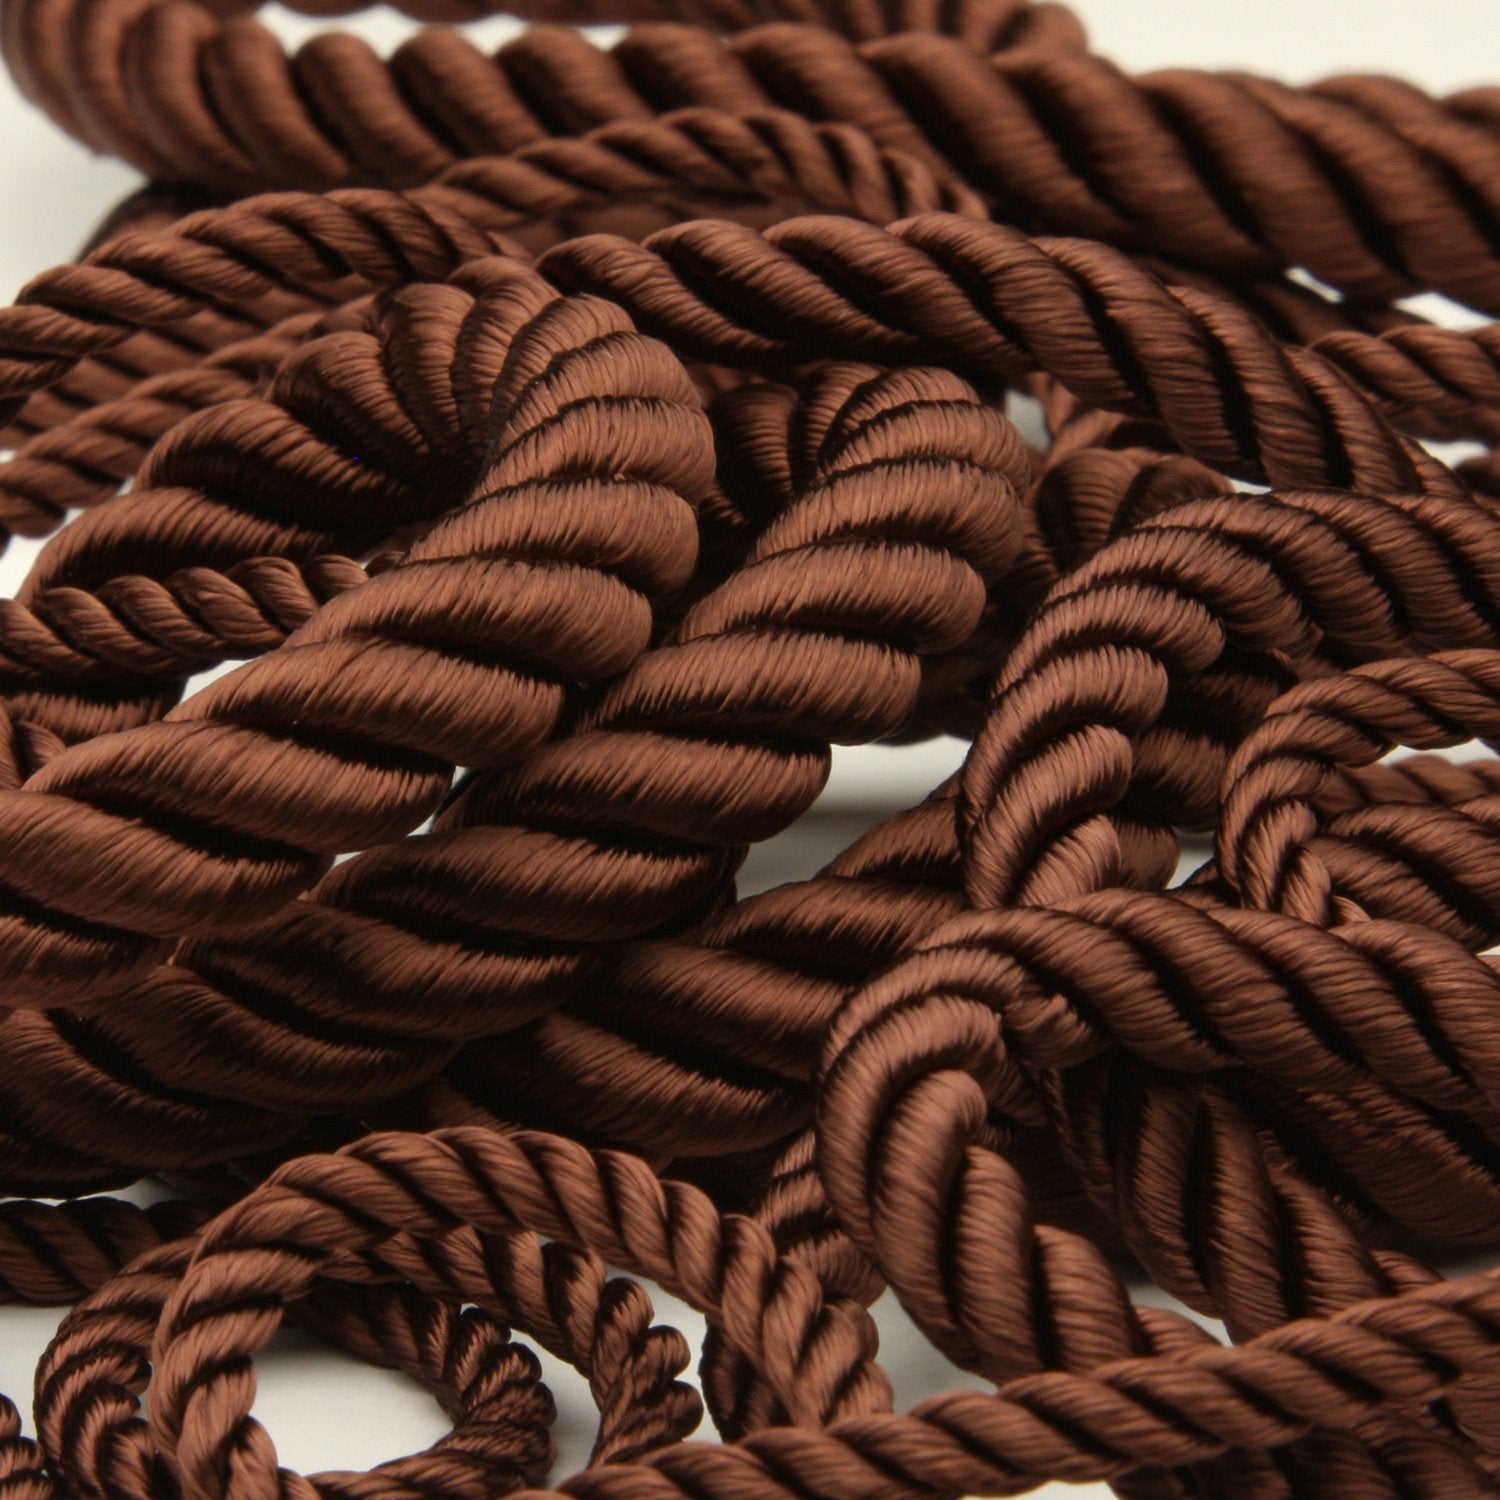 Wholesale] Rayon Twist Cord approx.4mm (5/32) 50 Meters Roll